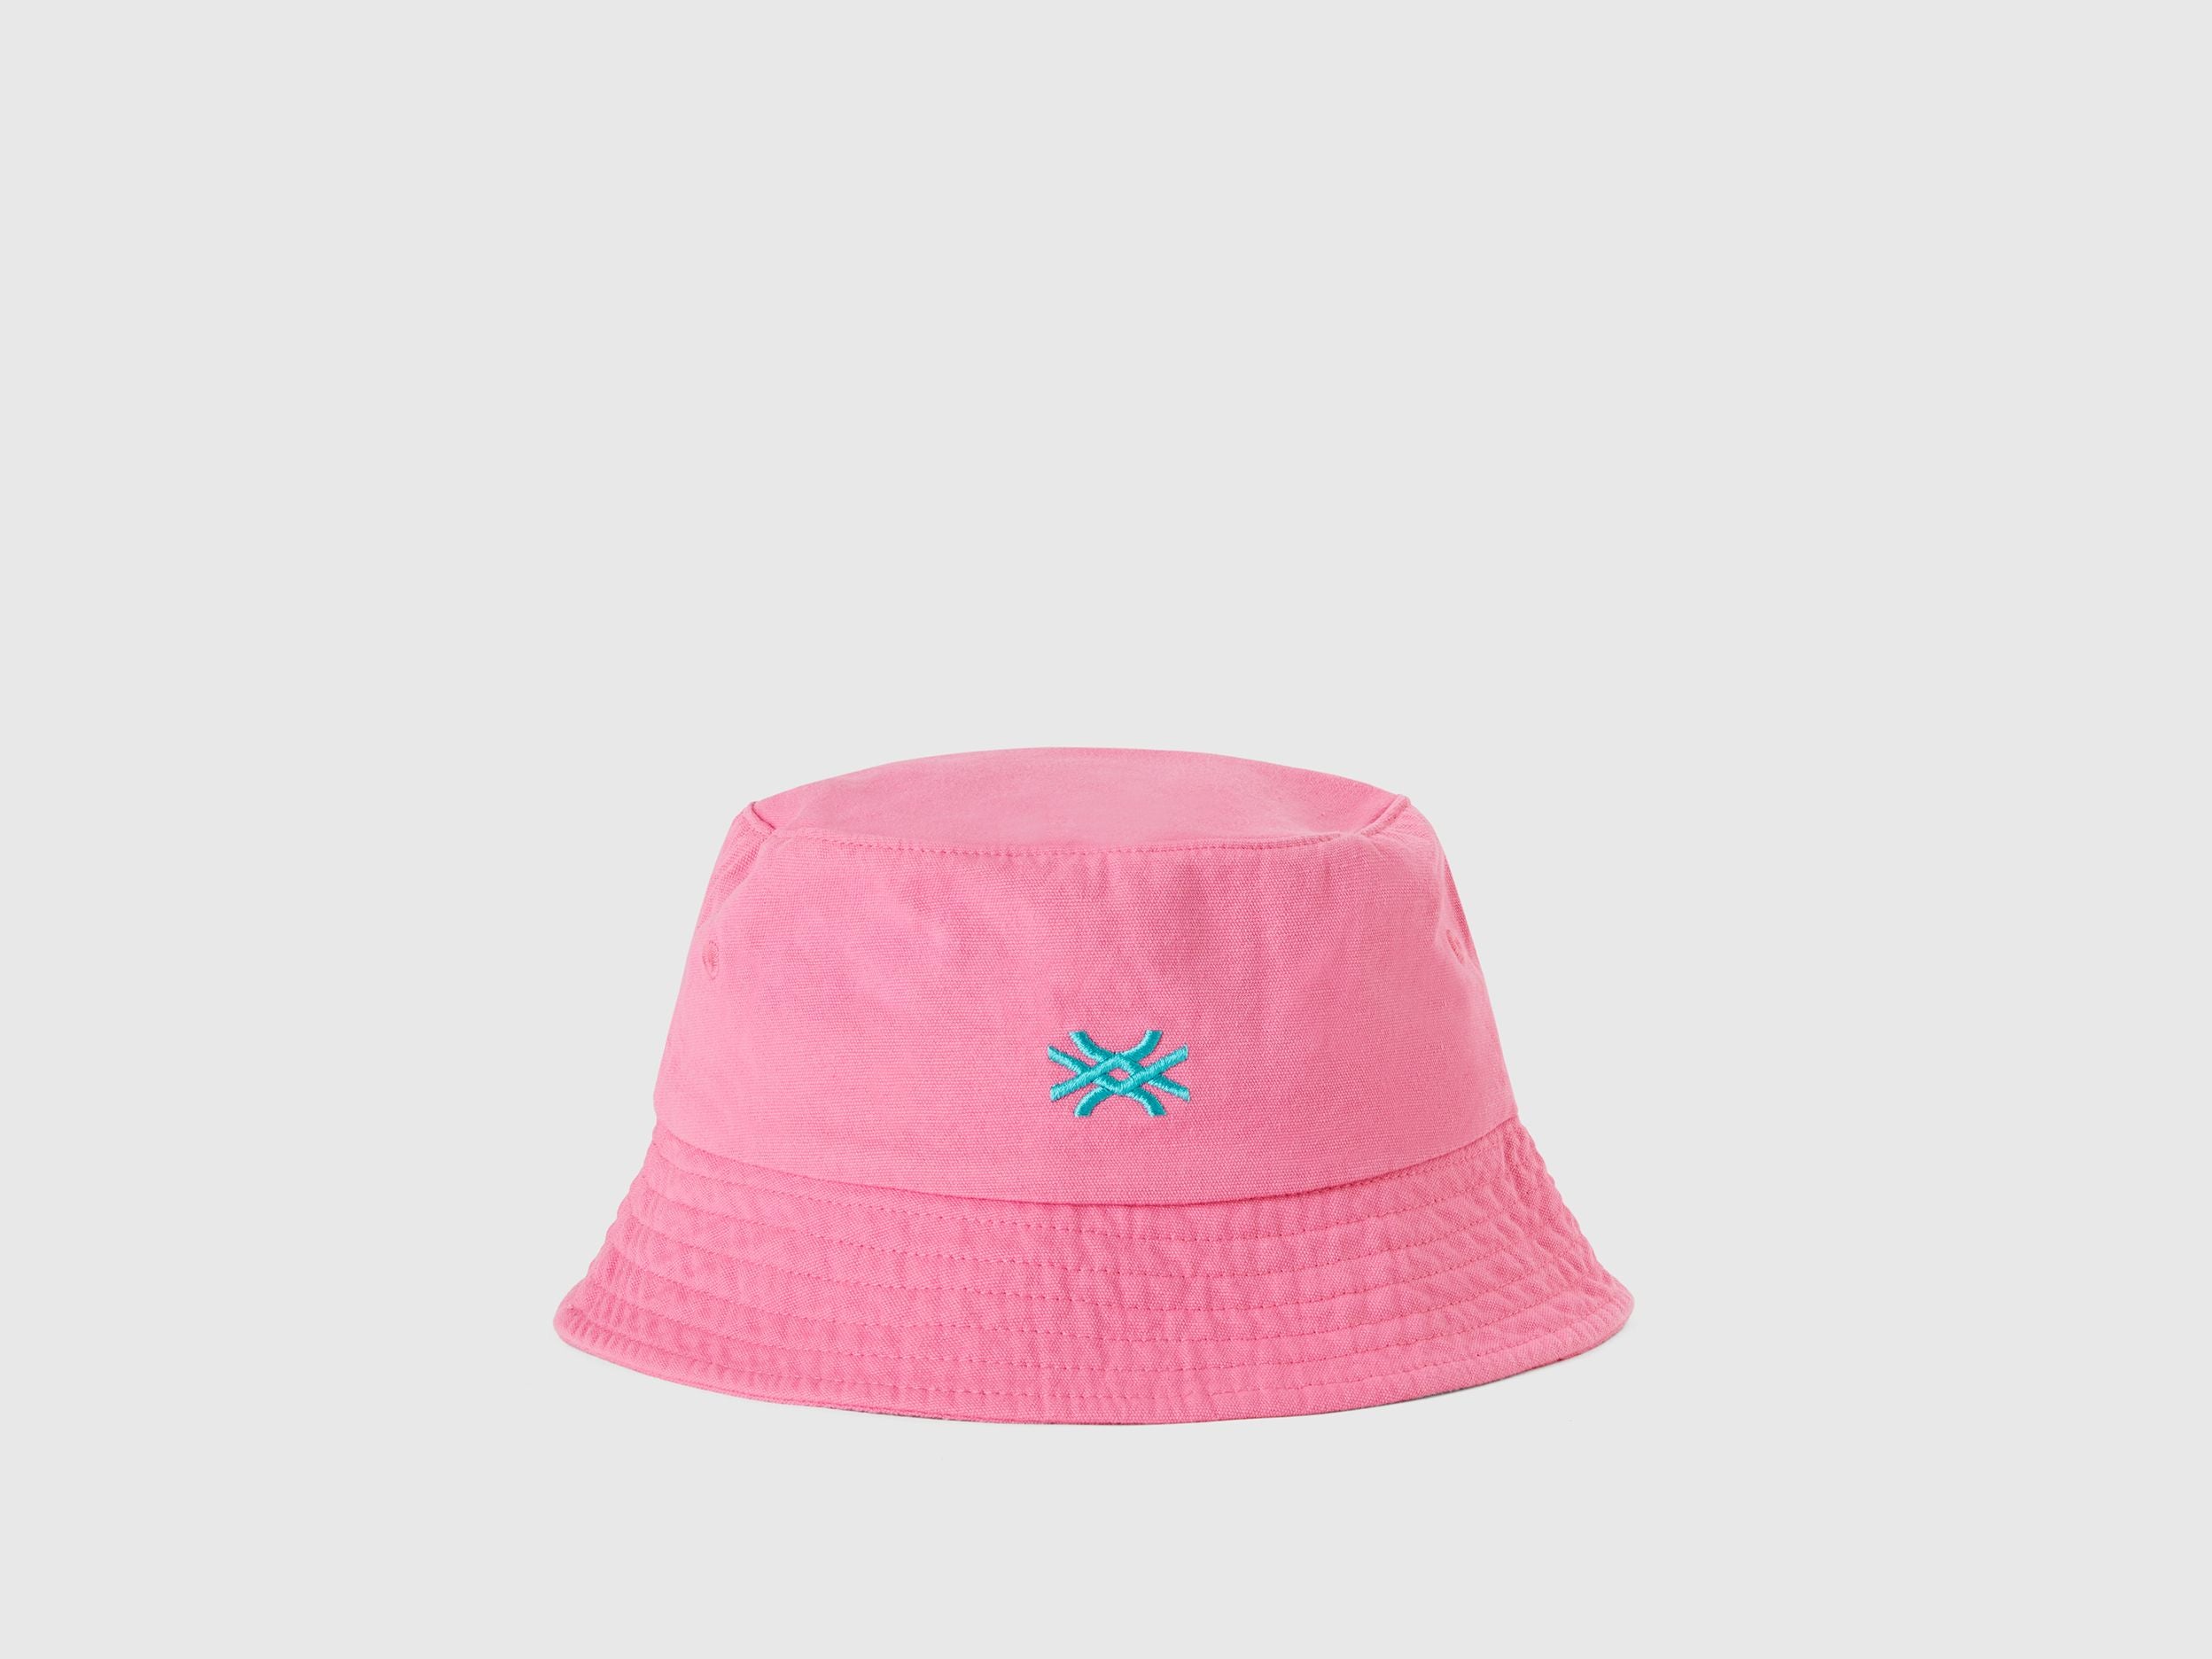 Fisherman's hat with logo